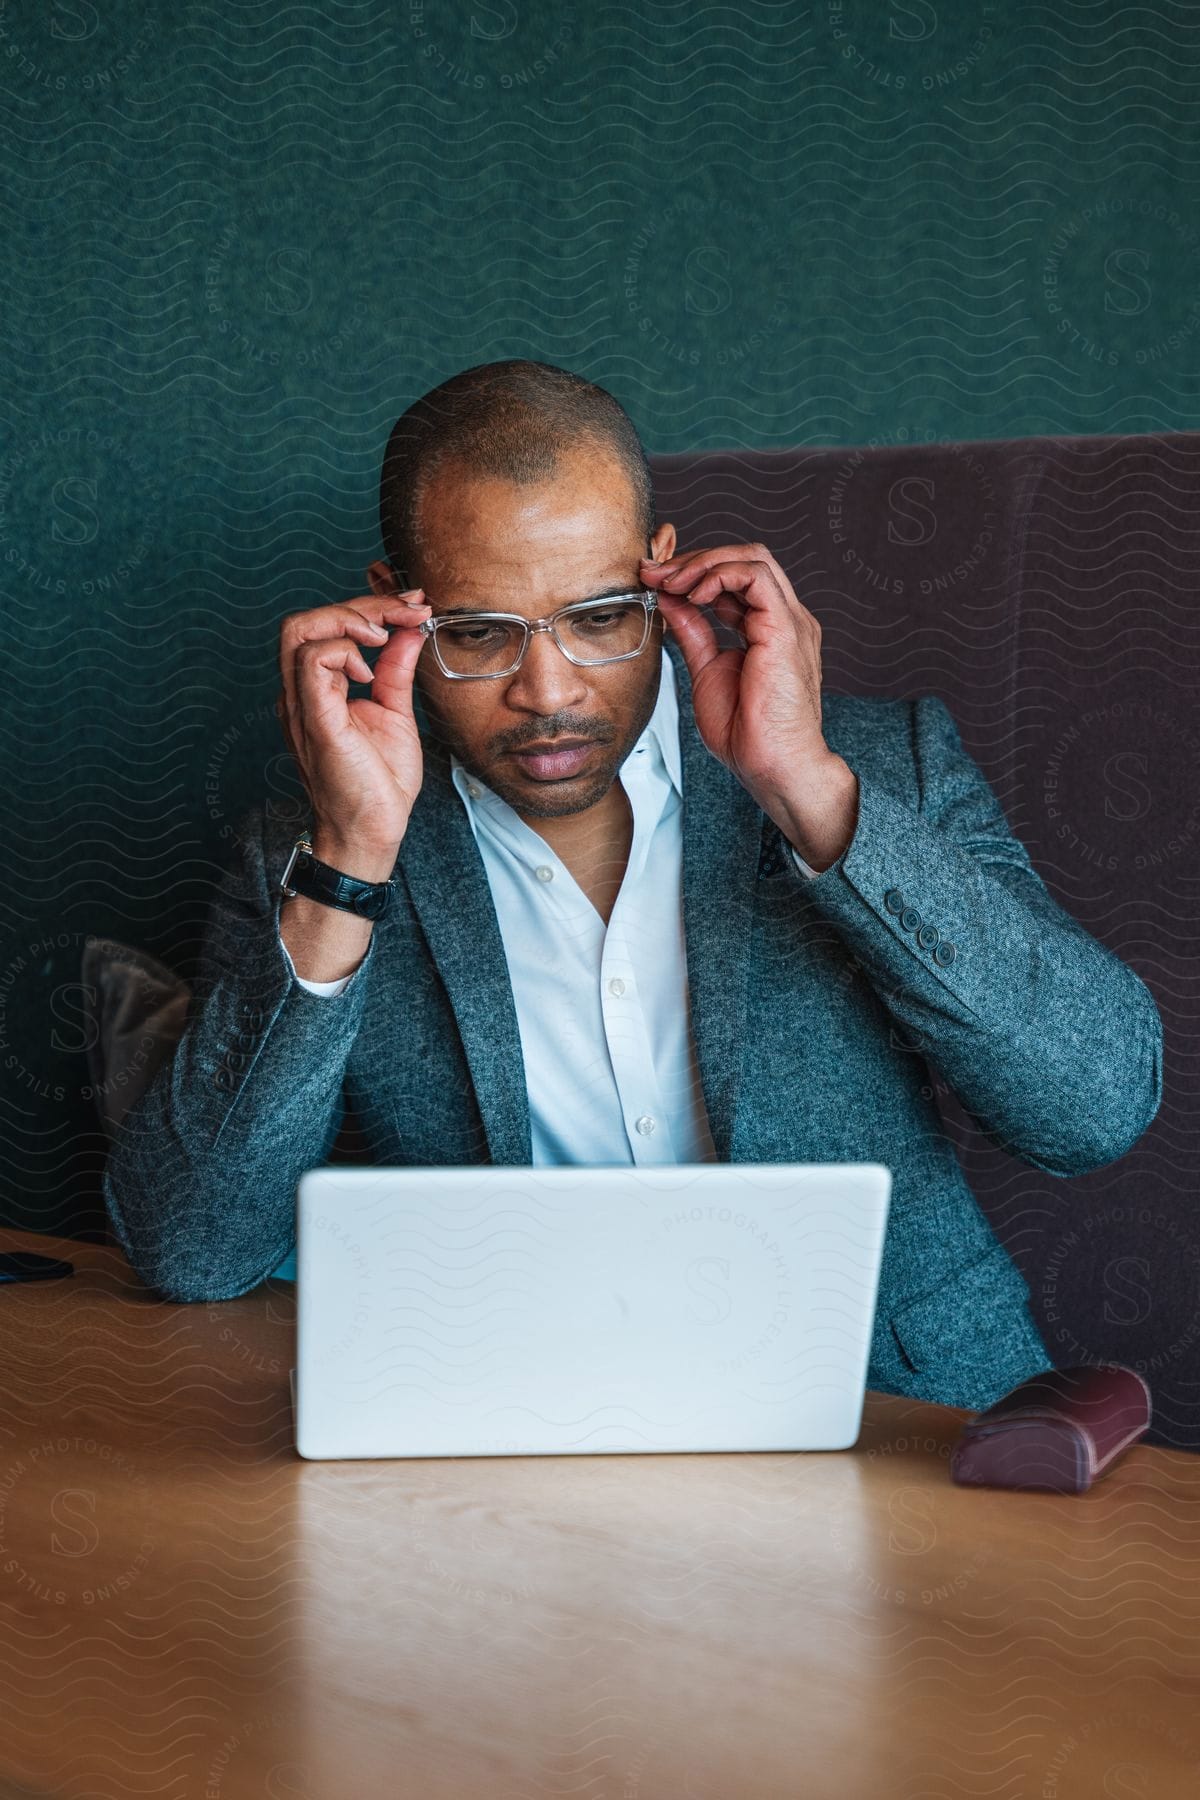 A man is positioning his glasses on his face as he looks at his laptop at his work desk.